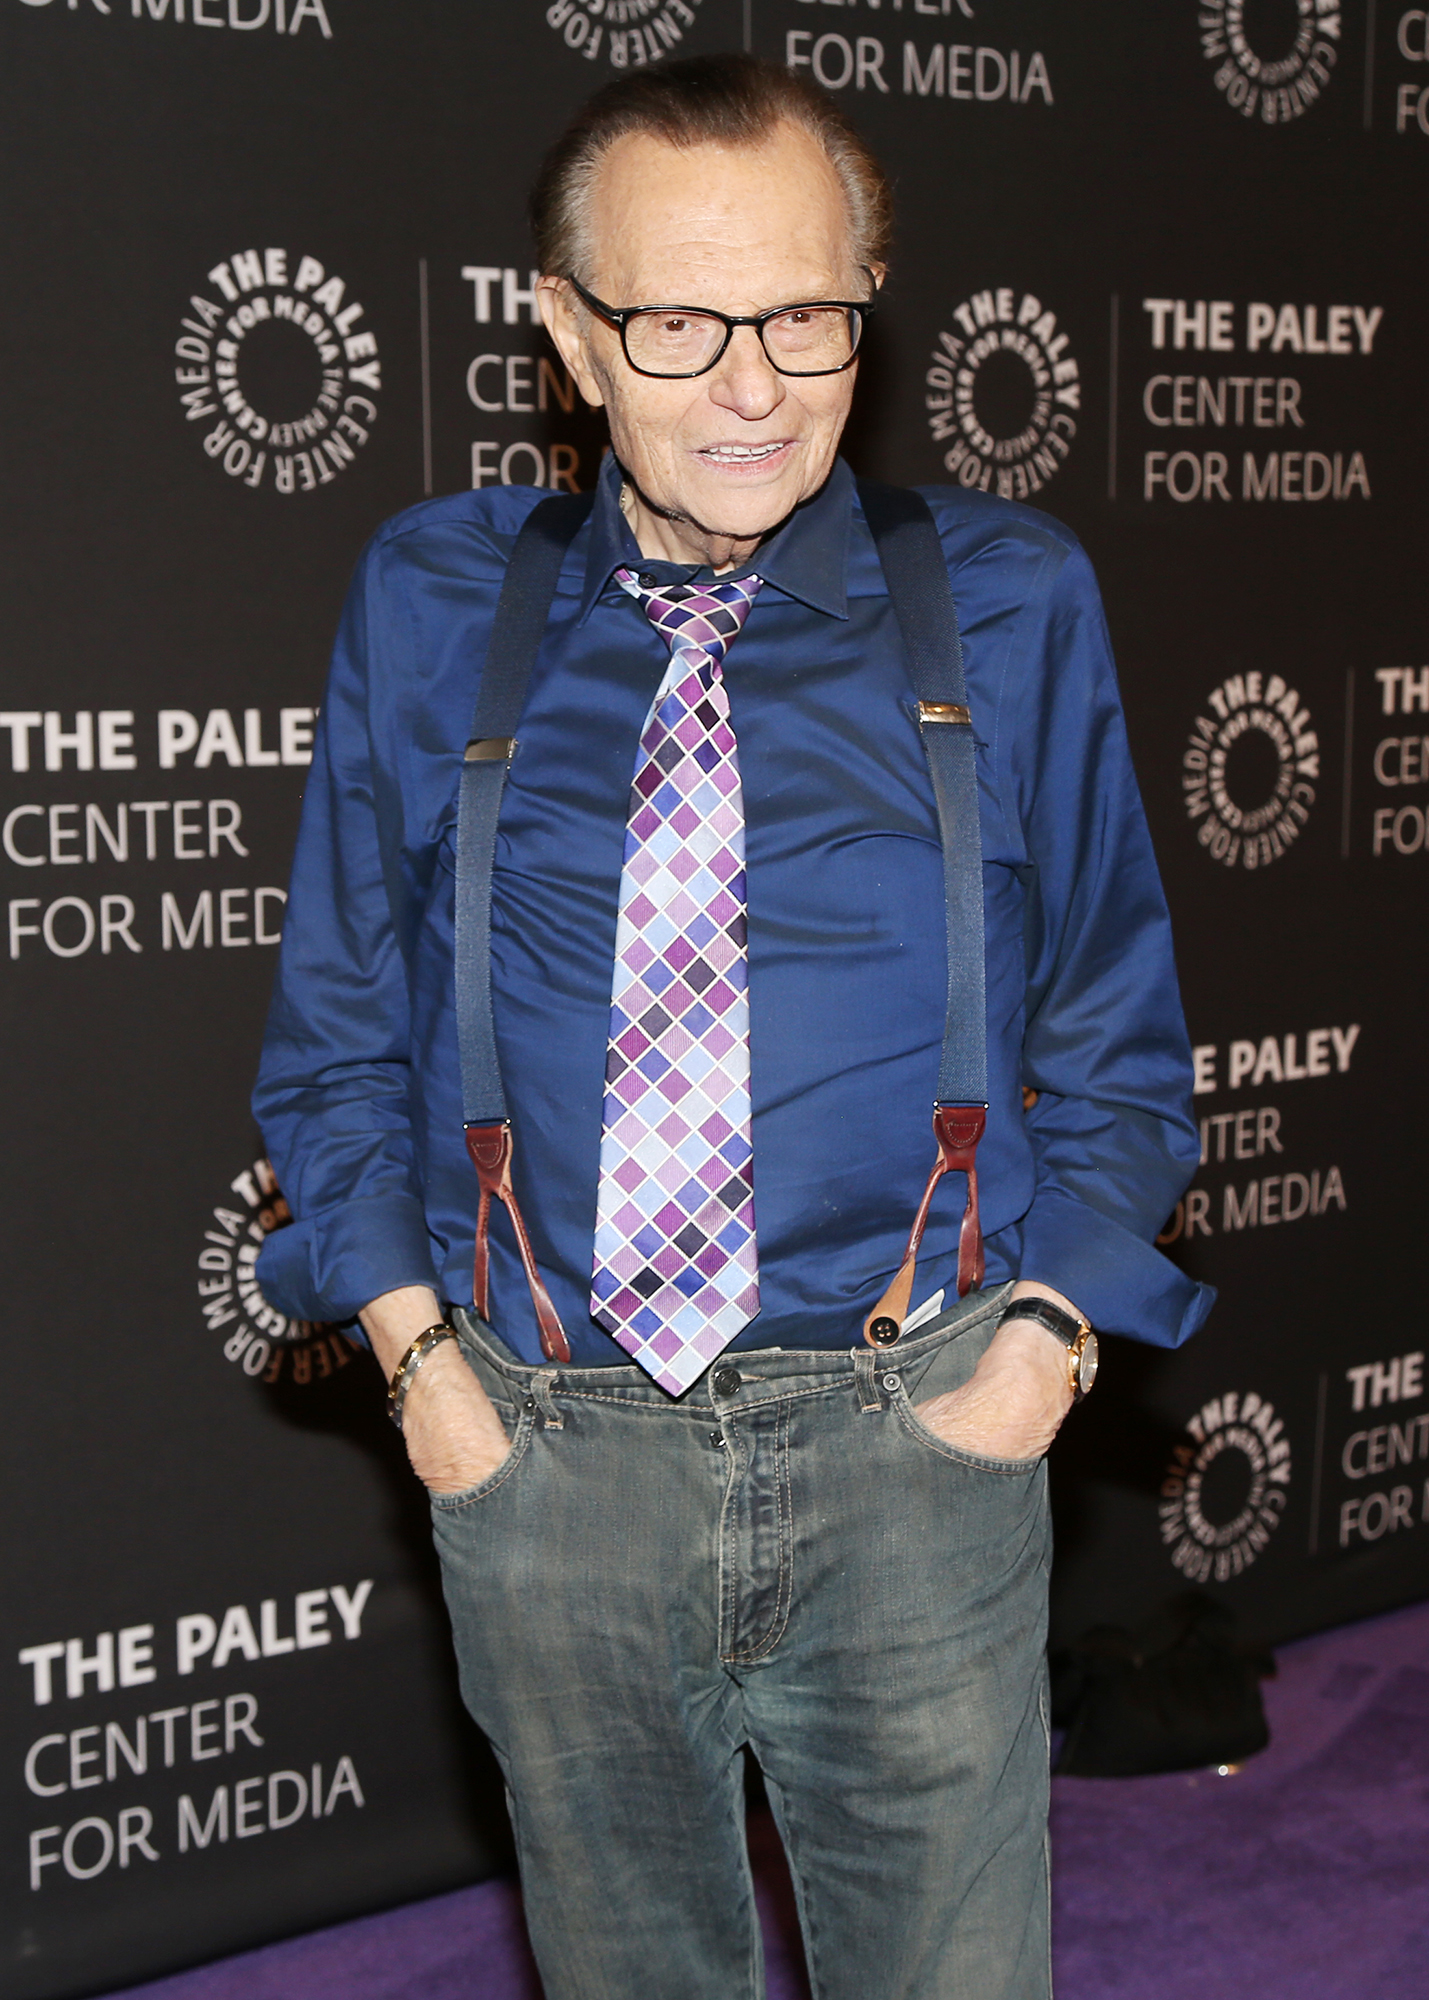 Larry King Hospitalized With COVID-19